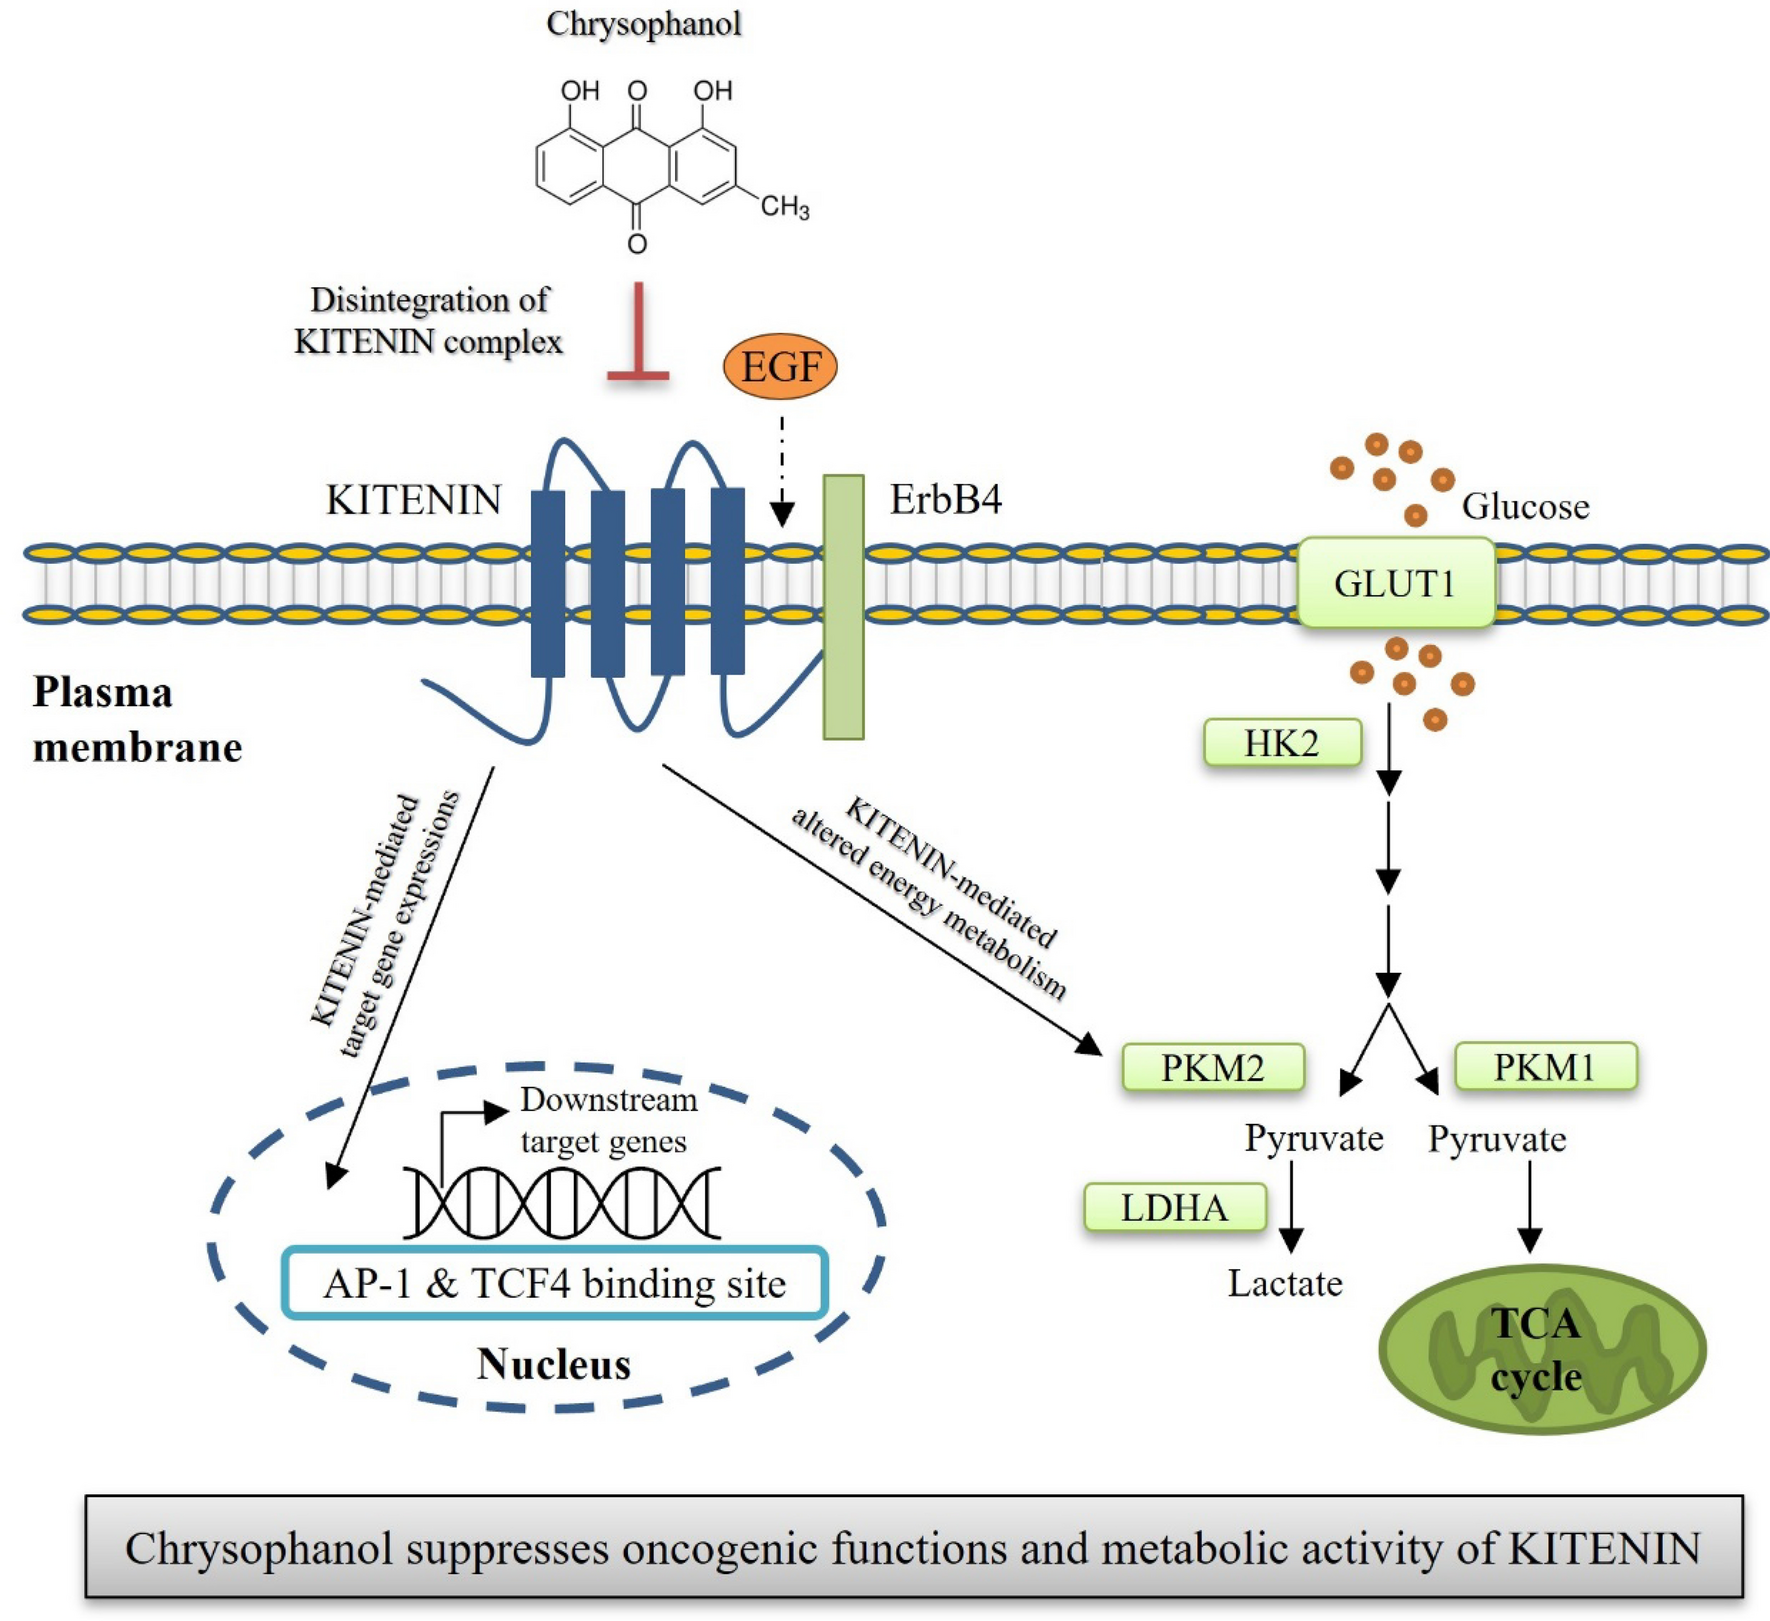 Chrysophanol inhibits of colorectal cancer cell motility and energy metabolism by targeting the KITENIN/ErbB4 oncogenic complex